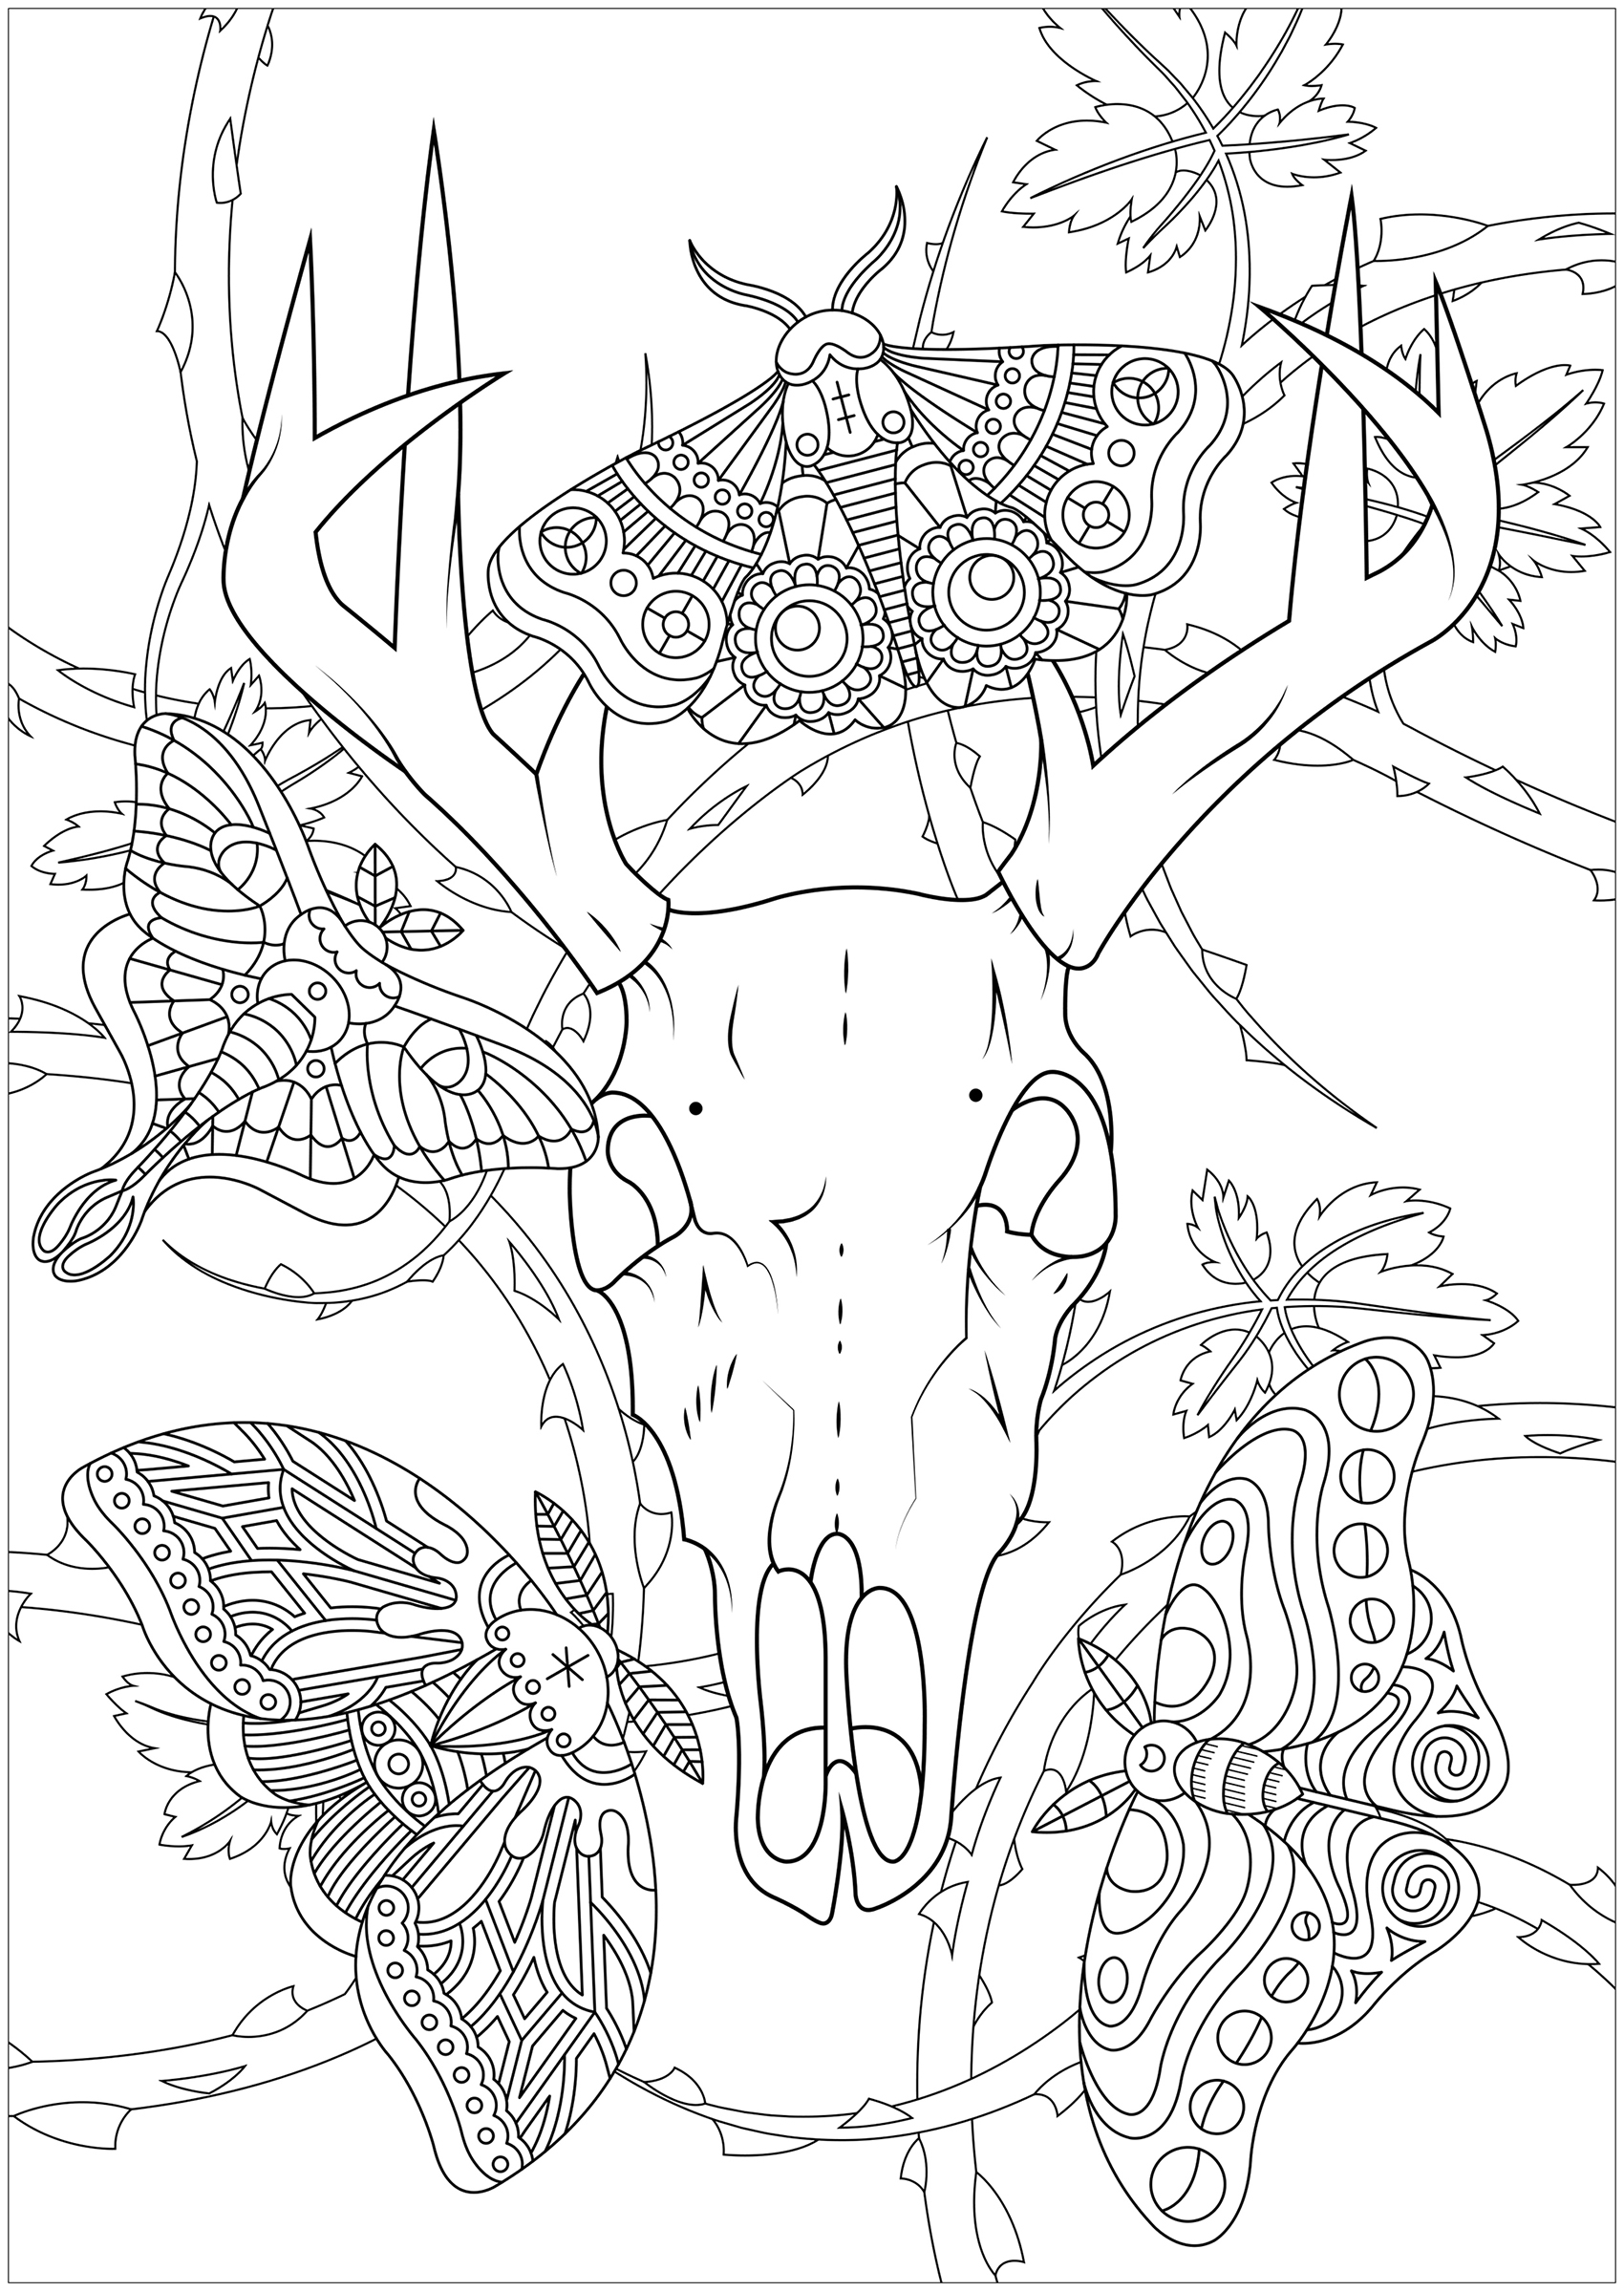 Four moths and a deer skull, with brambles in the background ... A gloomy and intriguing coloring page, Artist : Lucie